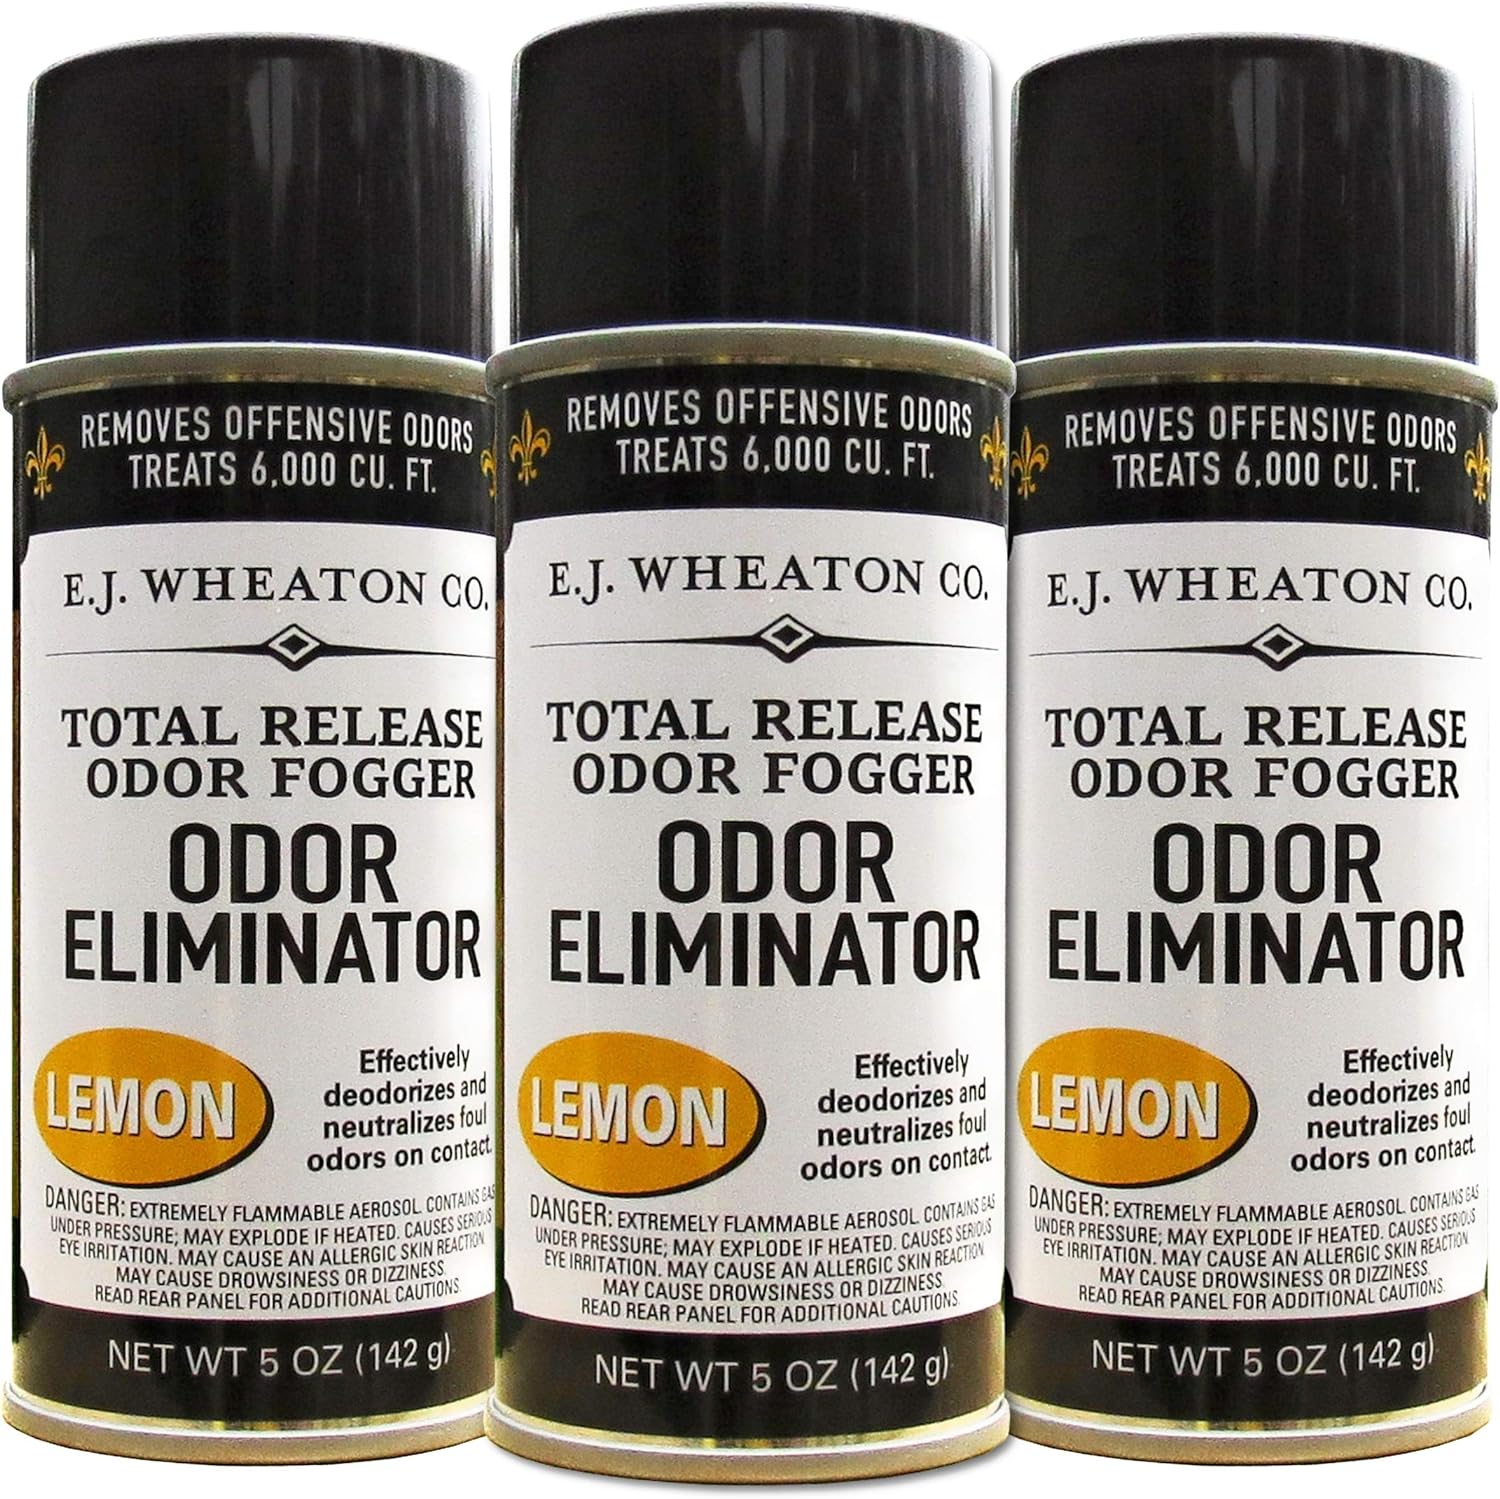 Odor Eliminator, Total Release Odor Fogger, 3 Pack, Effectively Deodorizes and Neutralizes Foul Odors on Contact, Lemon (5 OZ)…